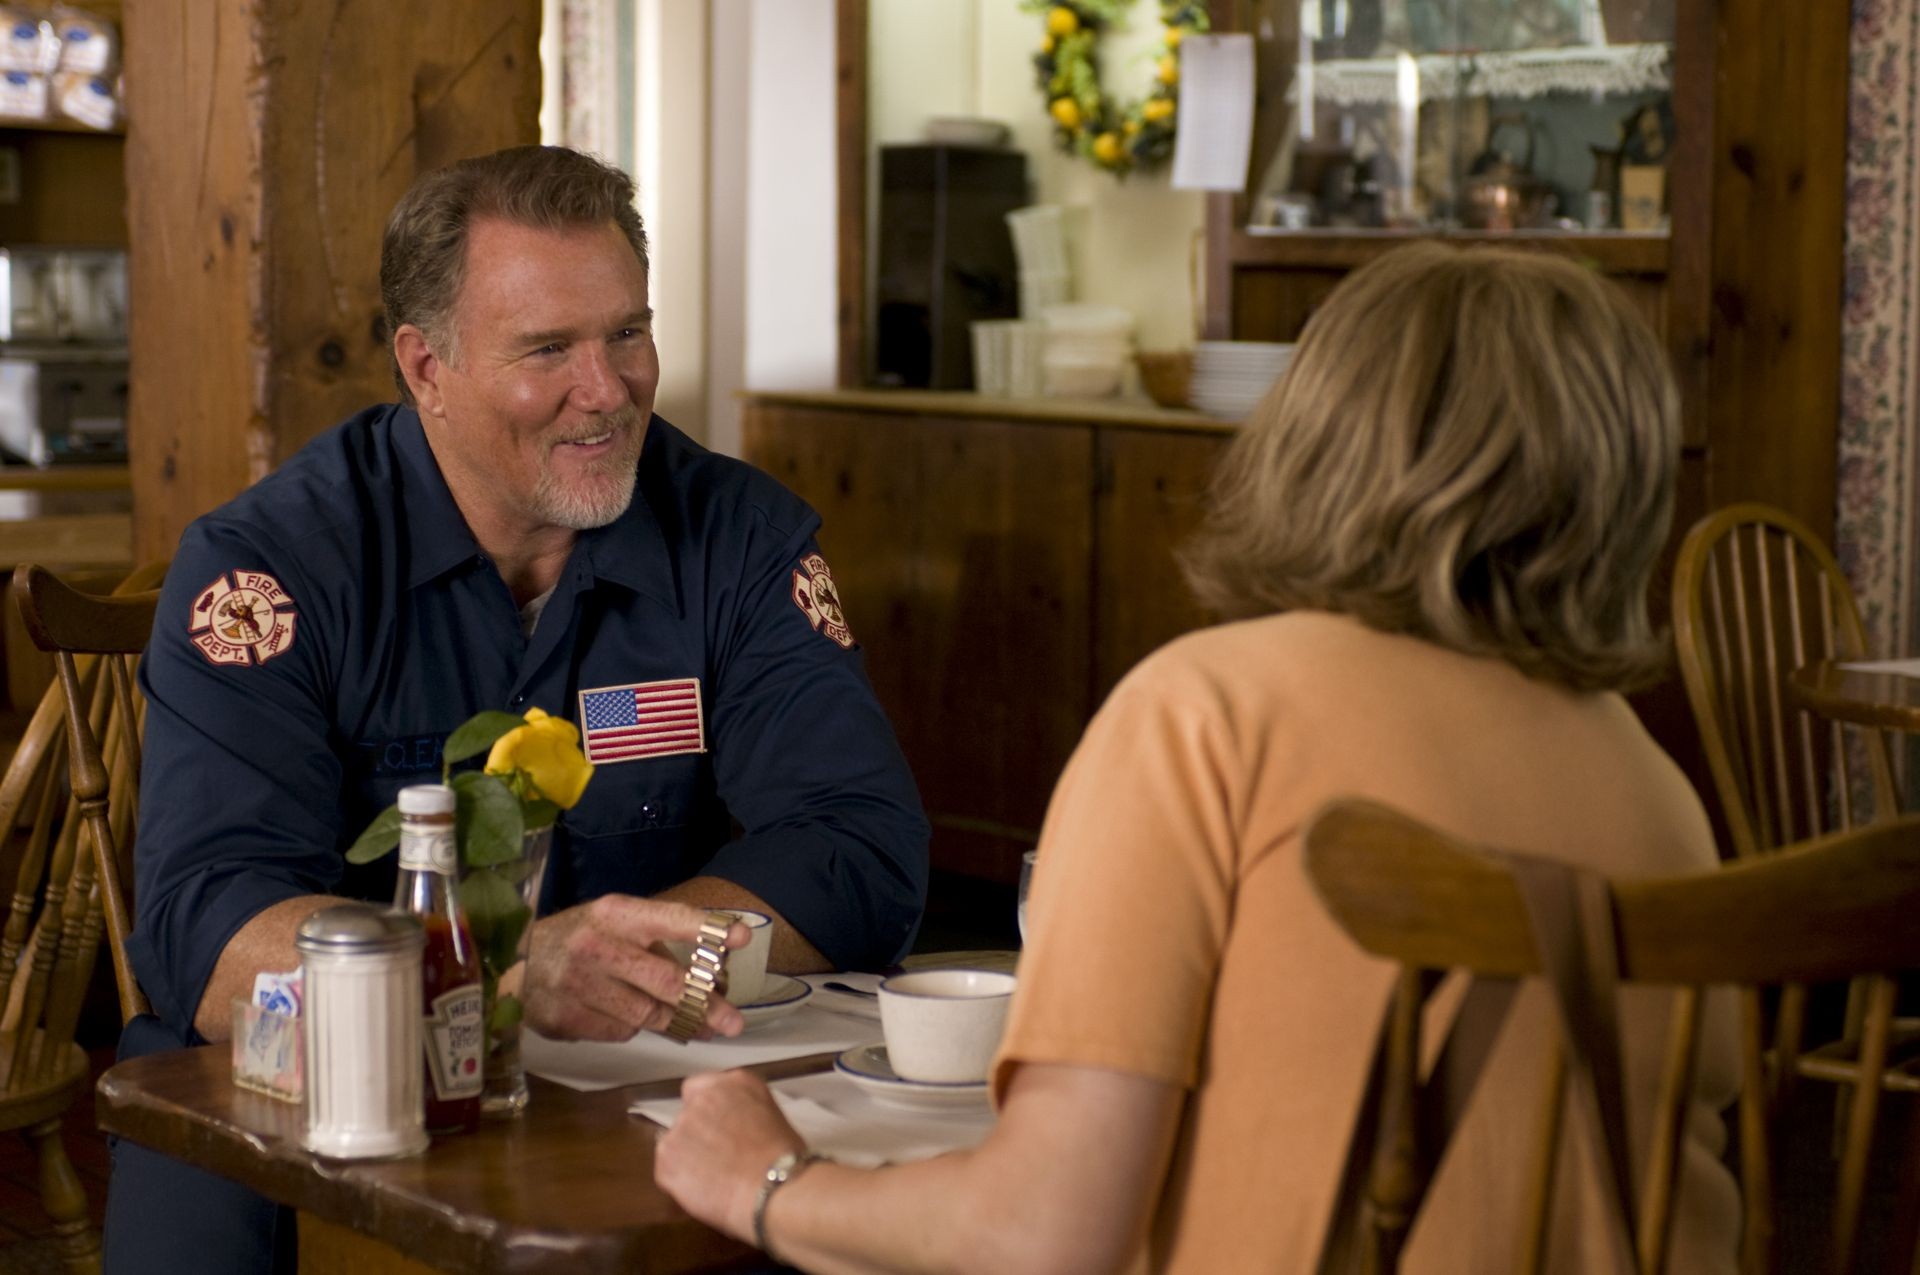 Michael McGrady stars as Frank Cleary in Variance Films' The Perfect Family (2012)